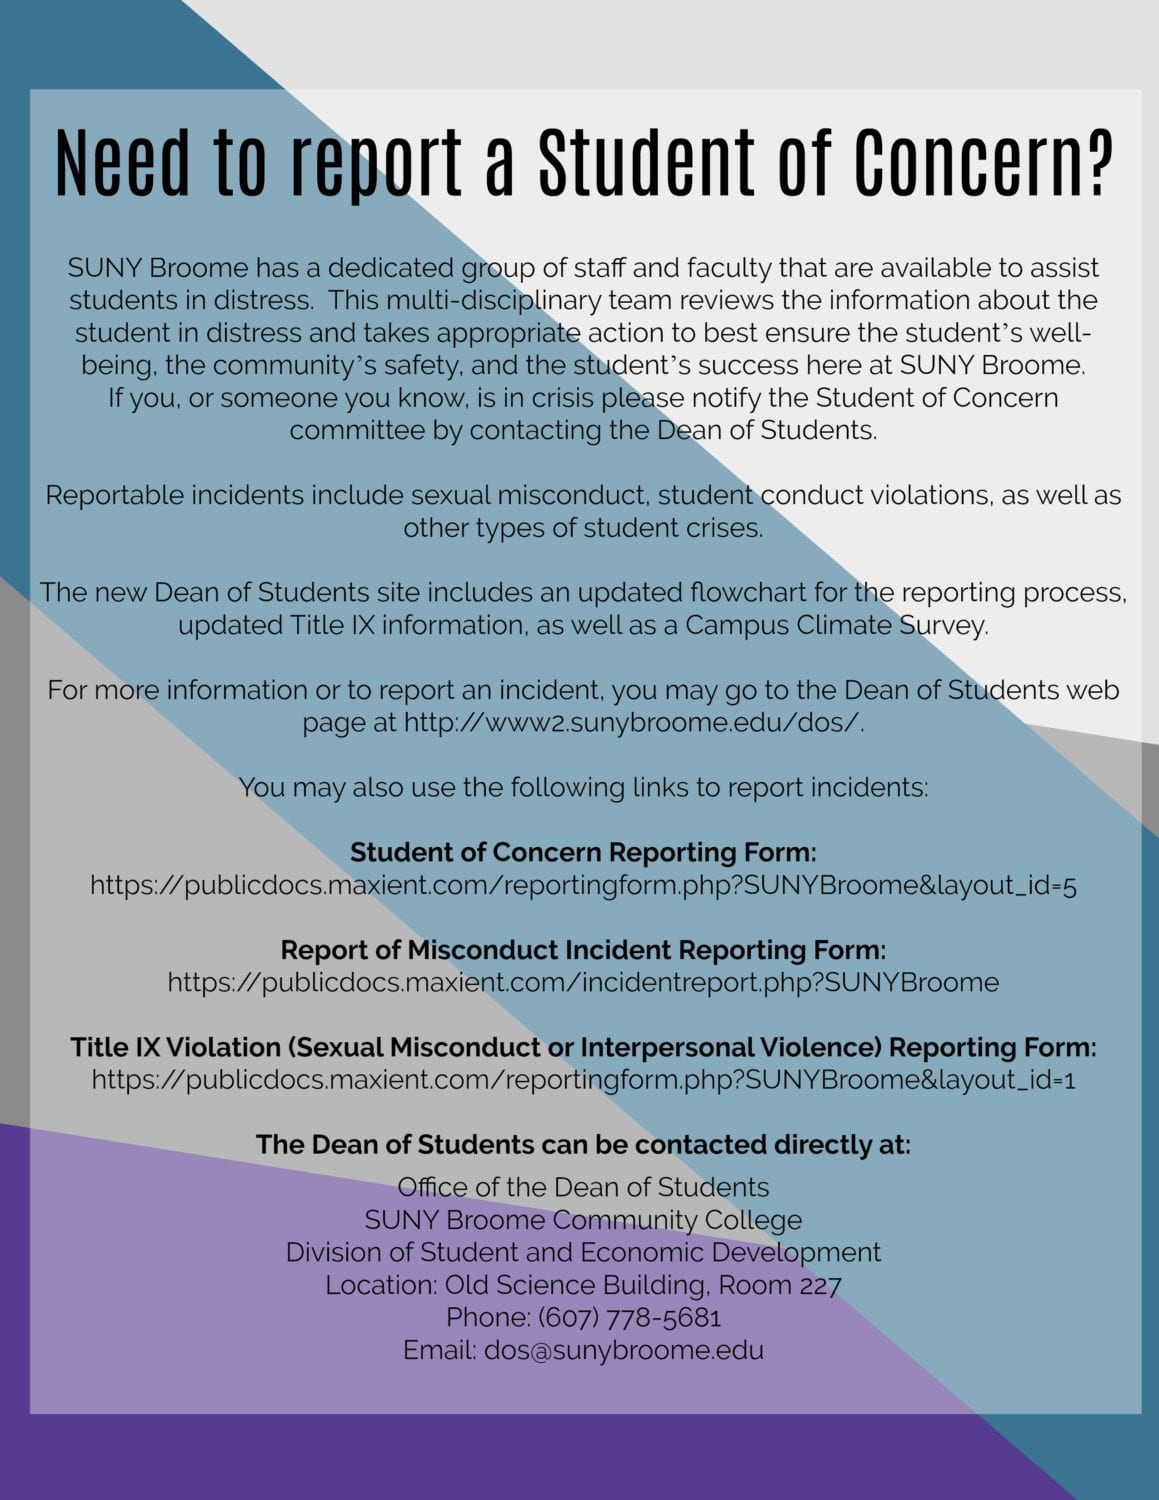 Need to Report a Student of Concern?